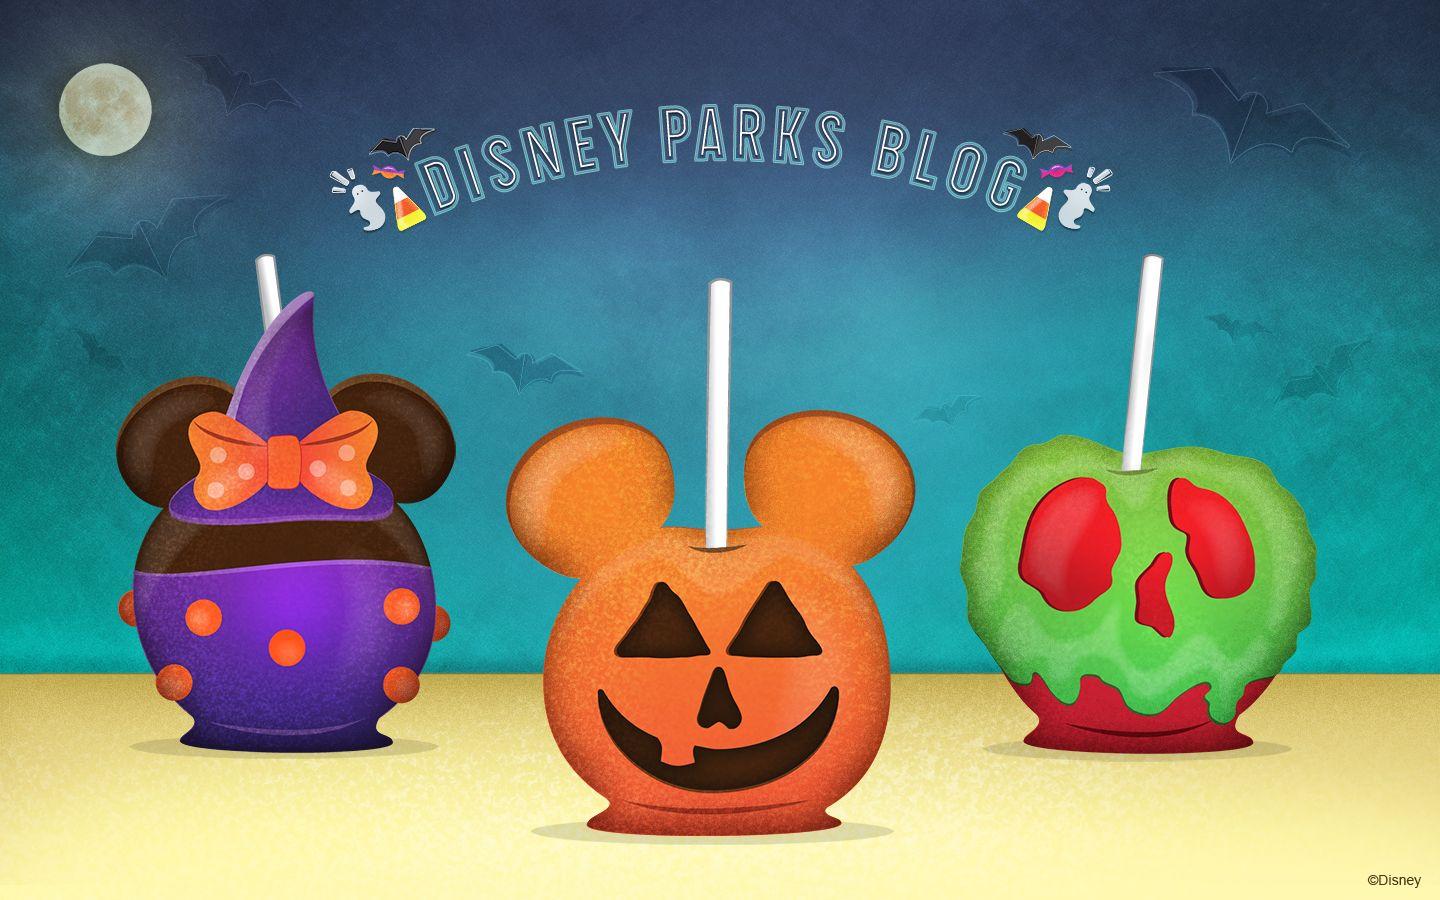 Download Our Halloween Candy Apples Wallpaper Now. Disney Parks Blog